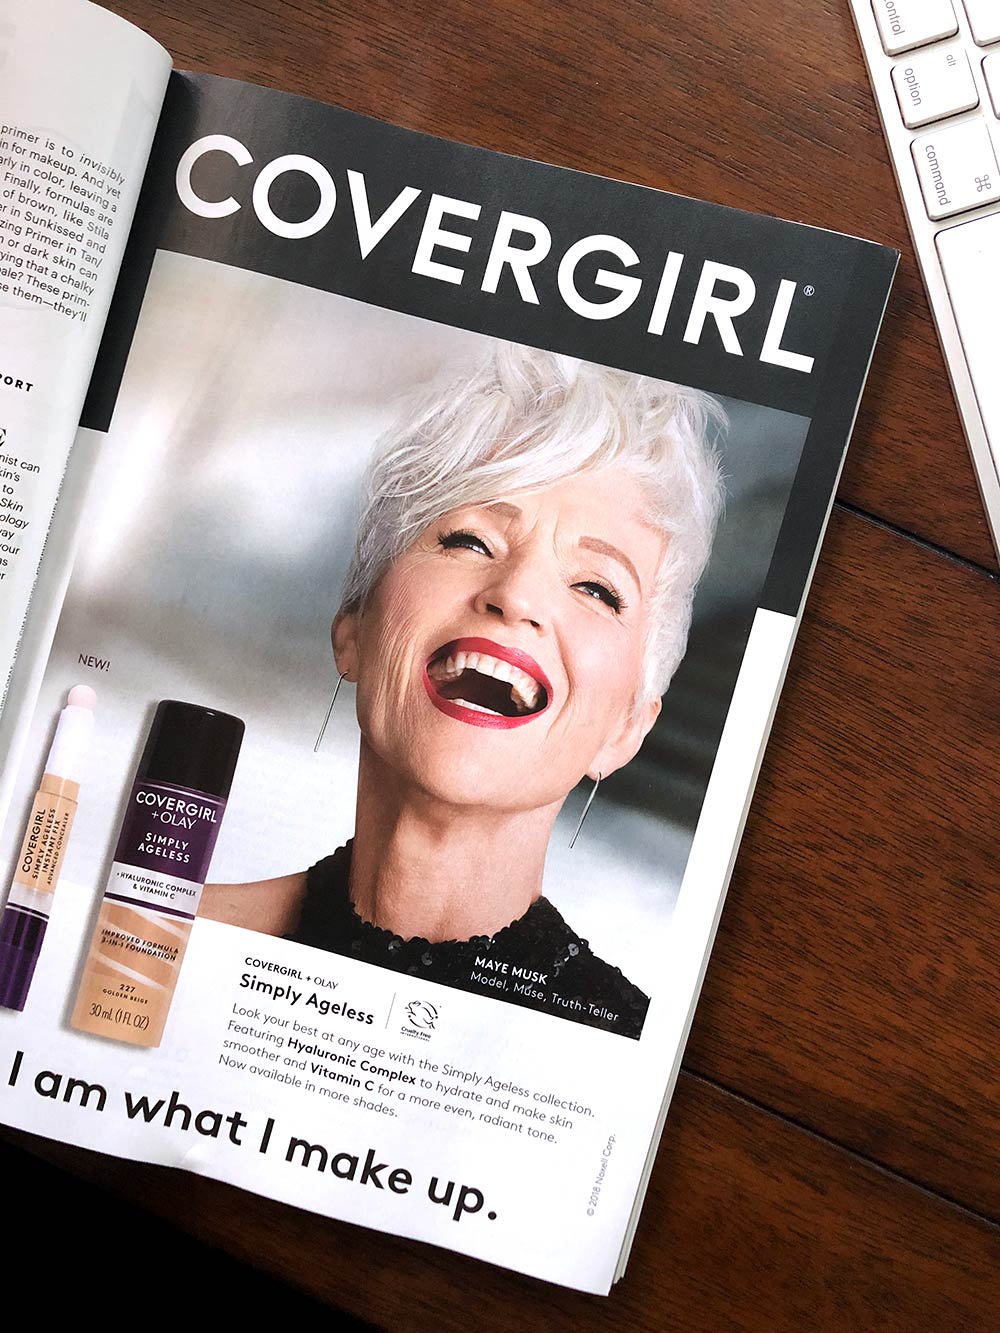 Maye Musk is a brand ambassador for Covergirl.